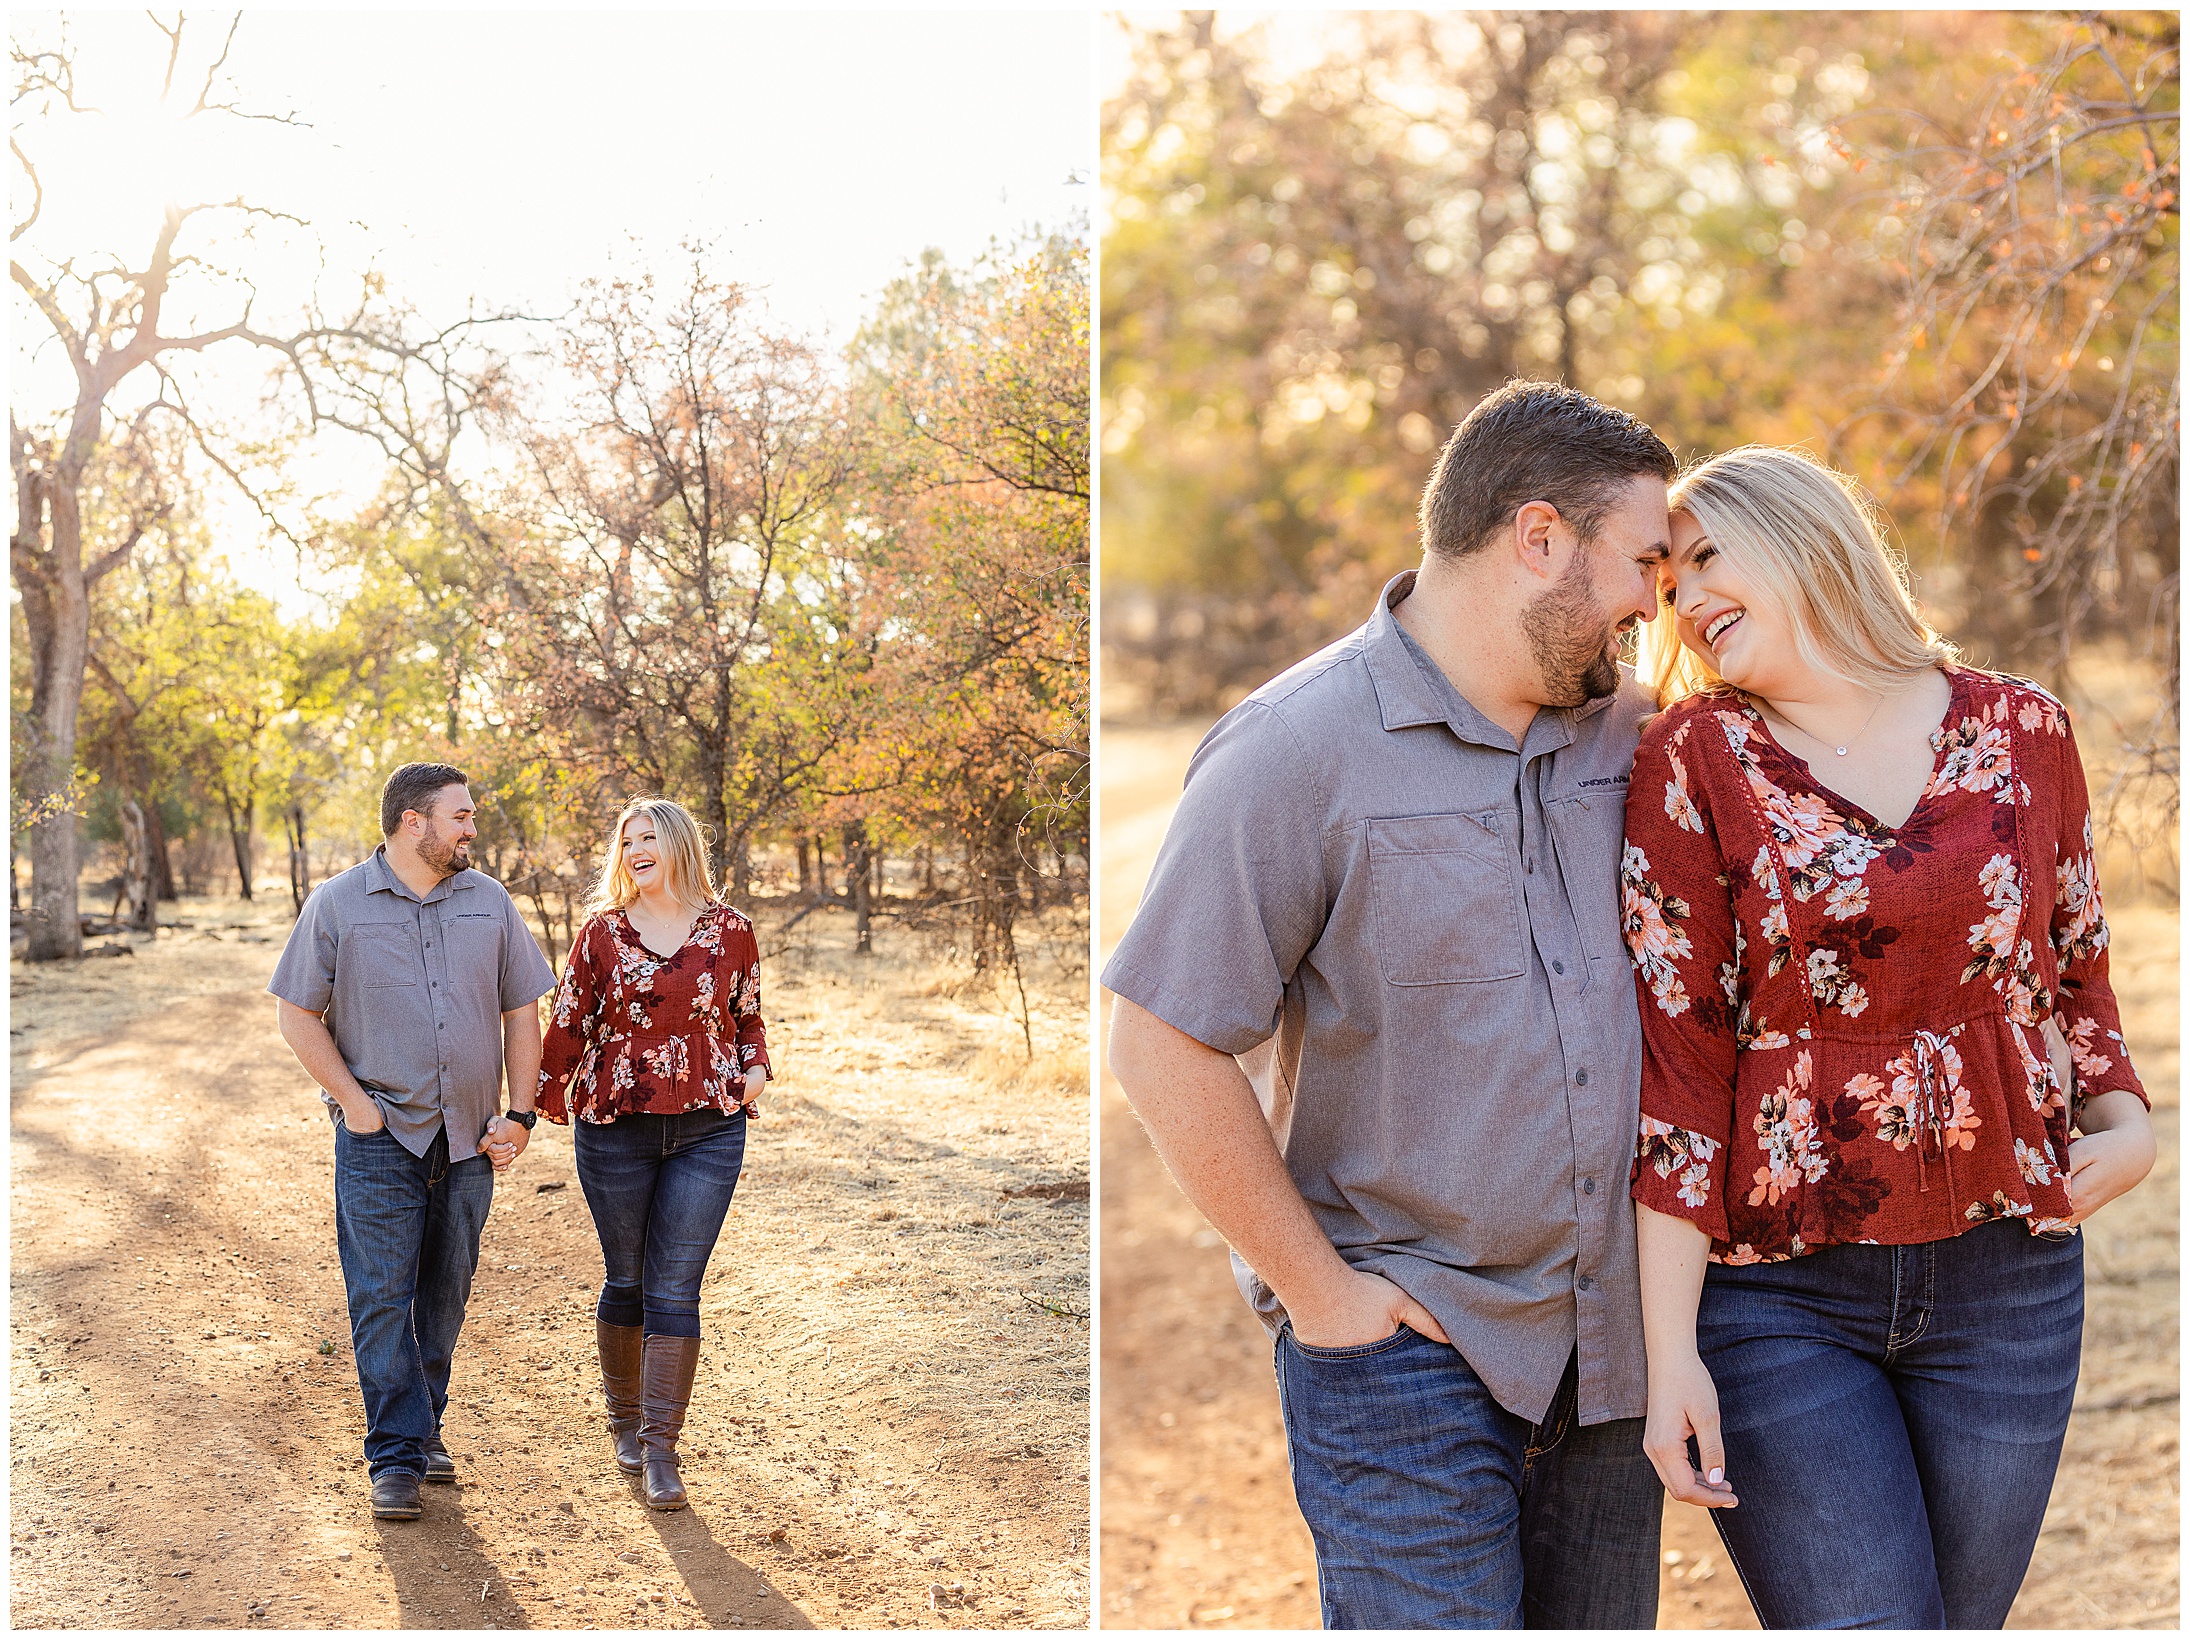 Upper Bidwell Park Engagement Session Chico CA Trail Fall September Yellow Flowers_0014.jpg